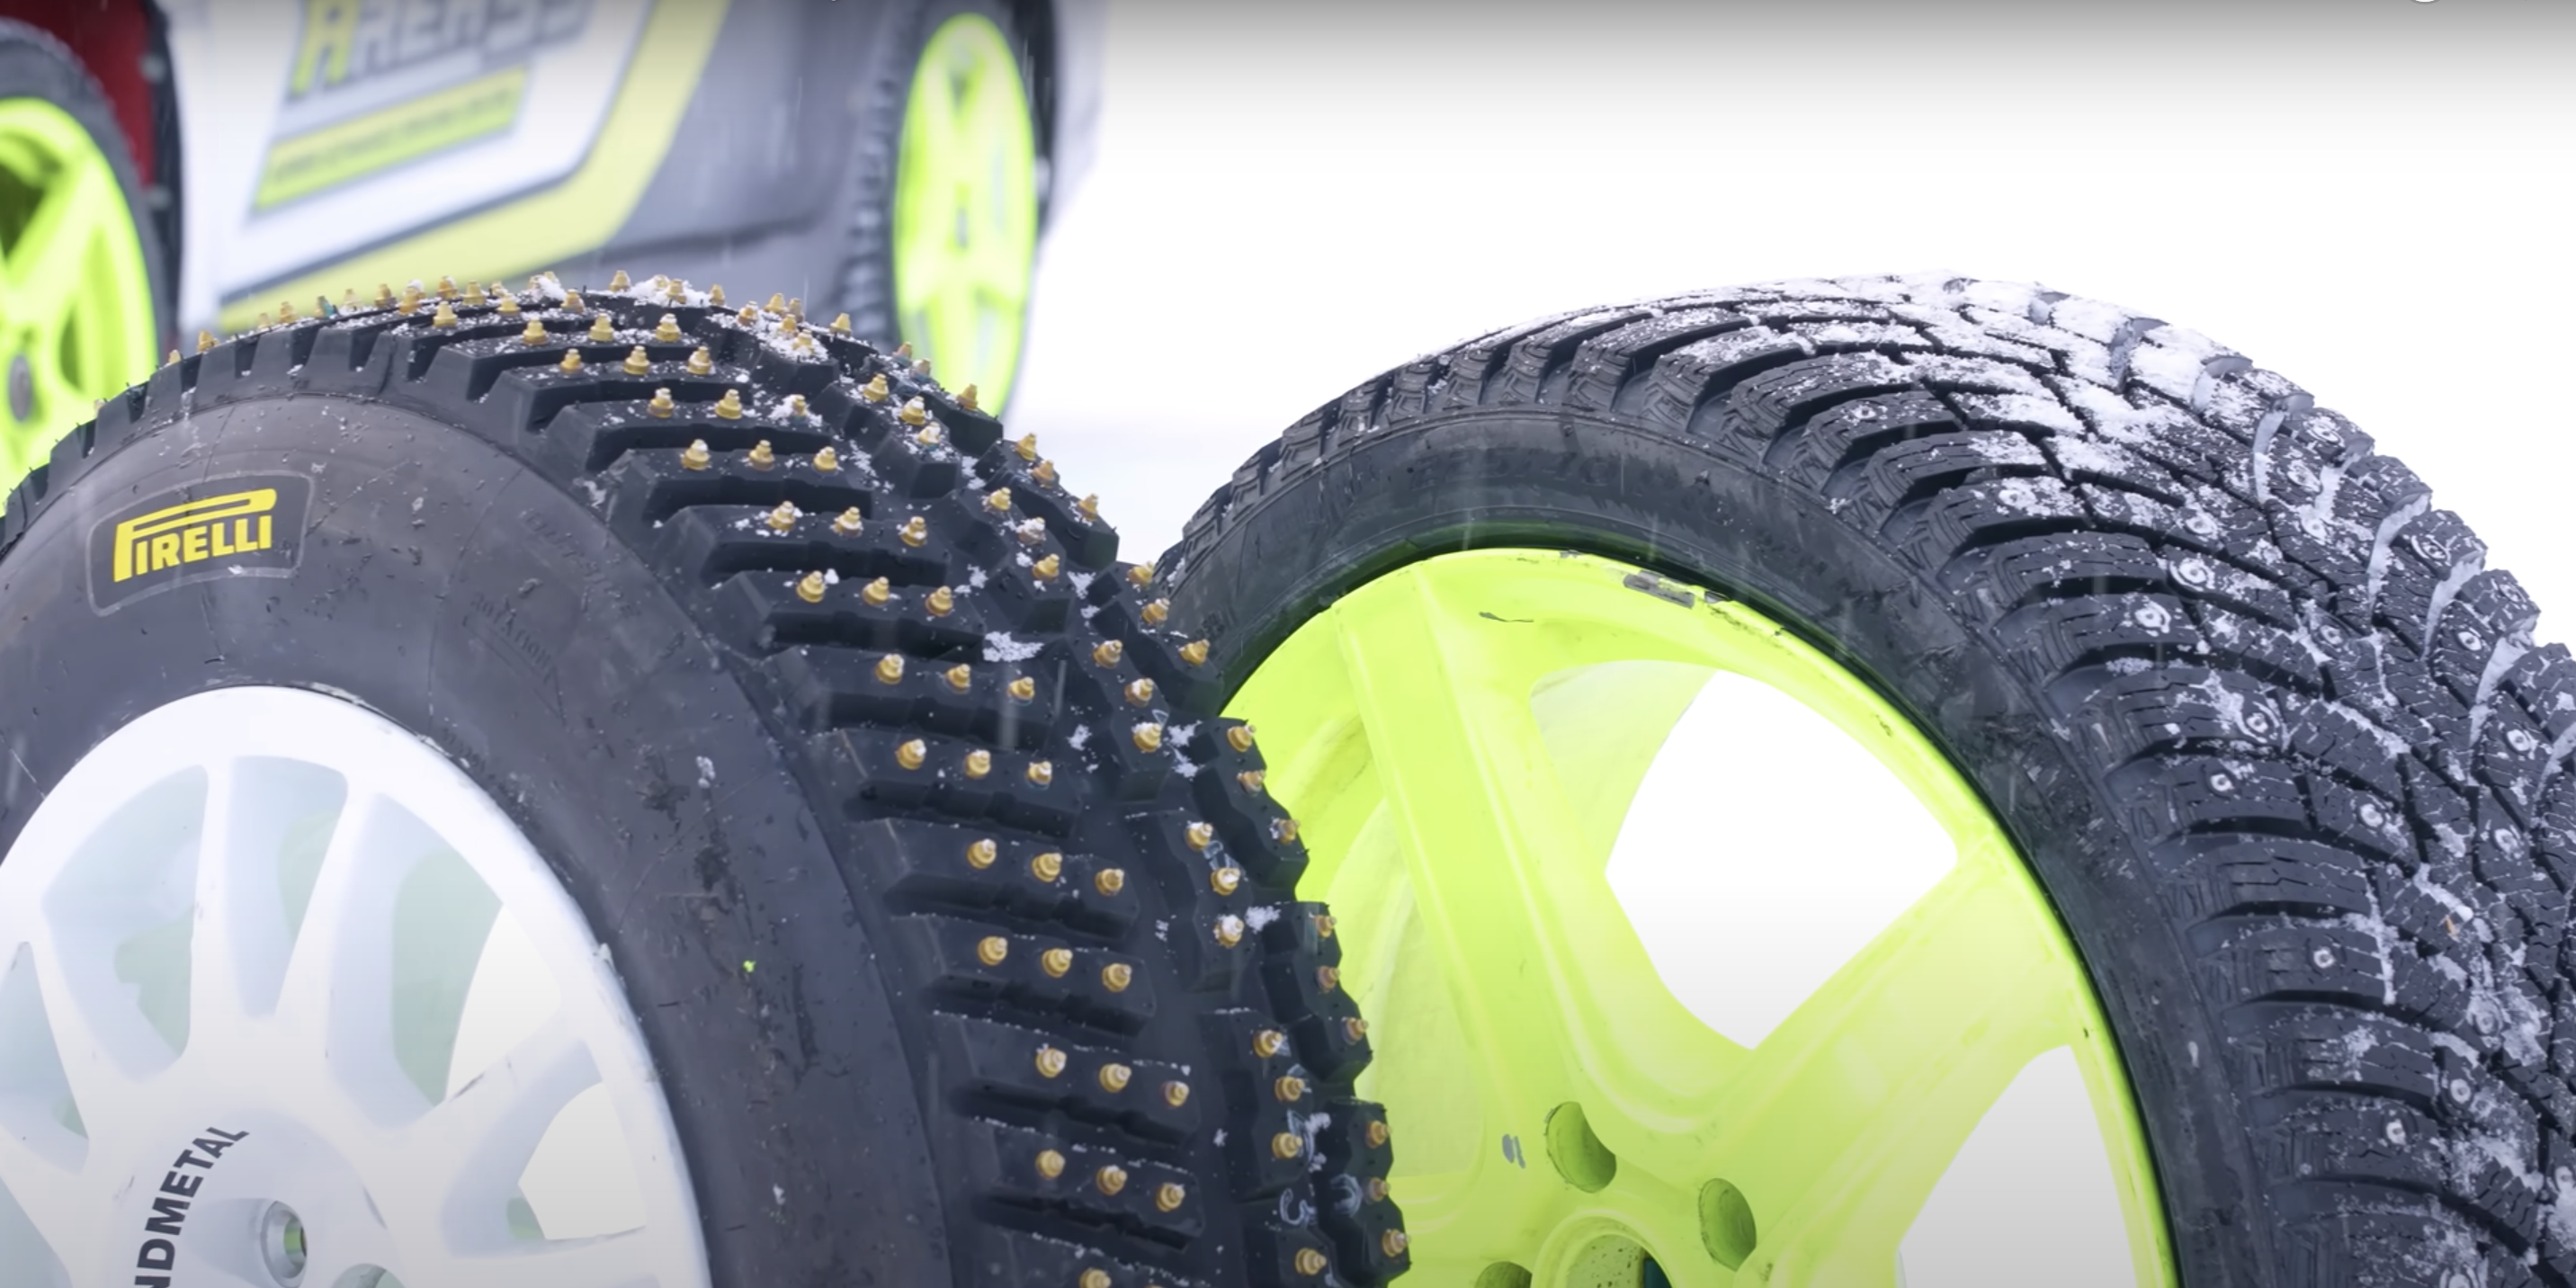 WRC-Spec Studded Tires Are Mind-Blowing